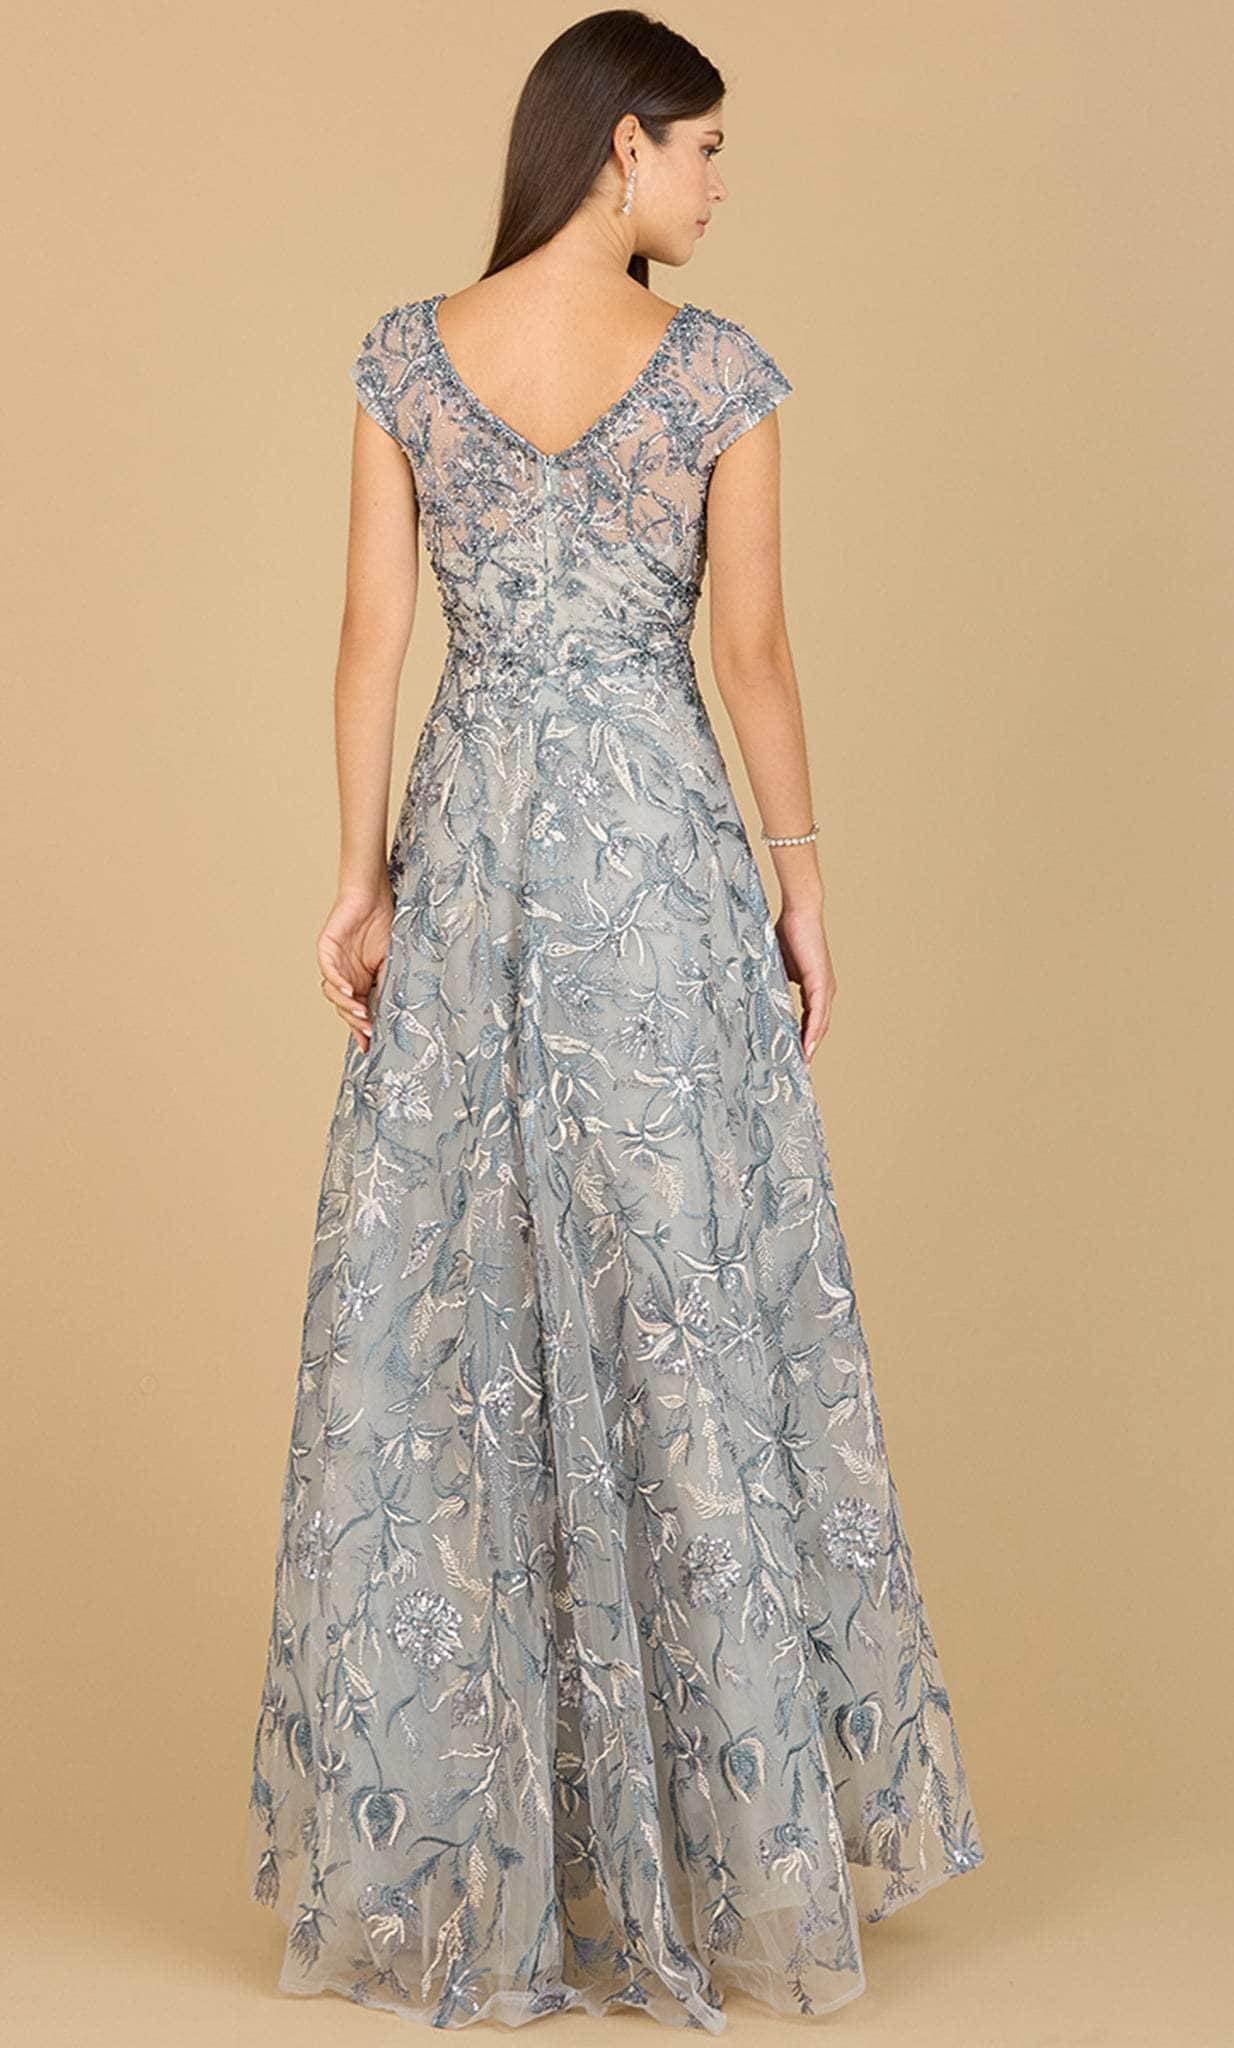 Lara Dresses 29196 - Embroidered Sleeveless Evening Gown Special Occasion Dress